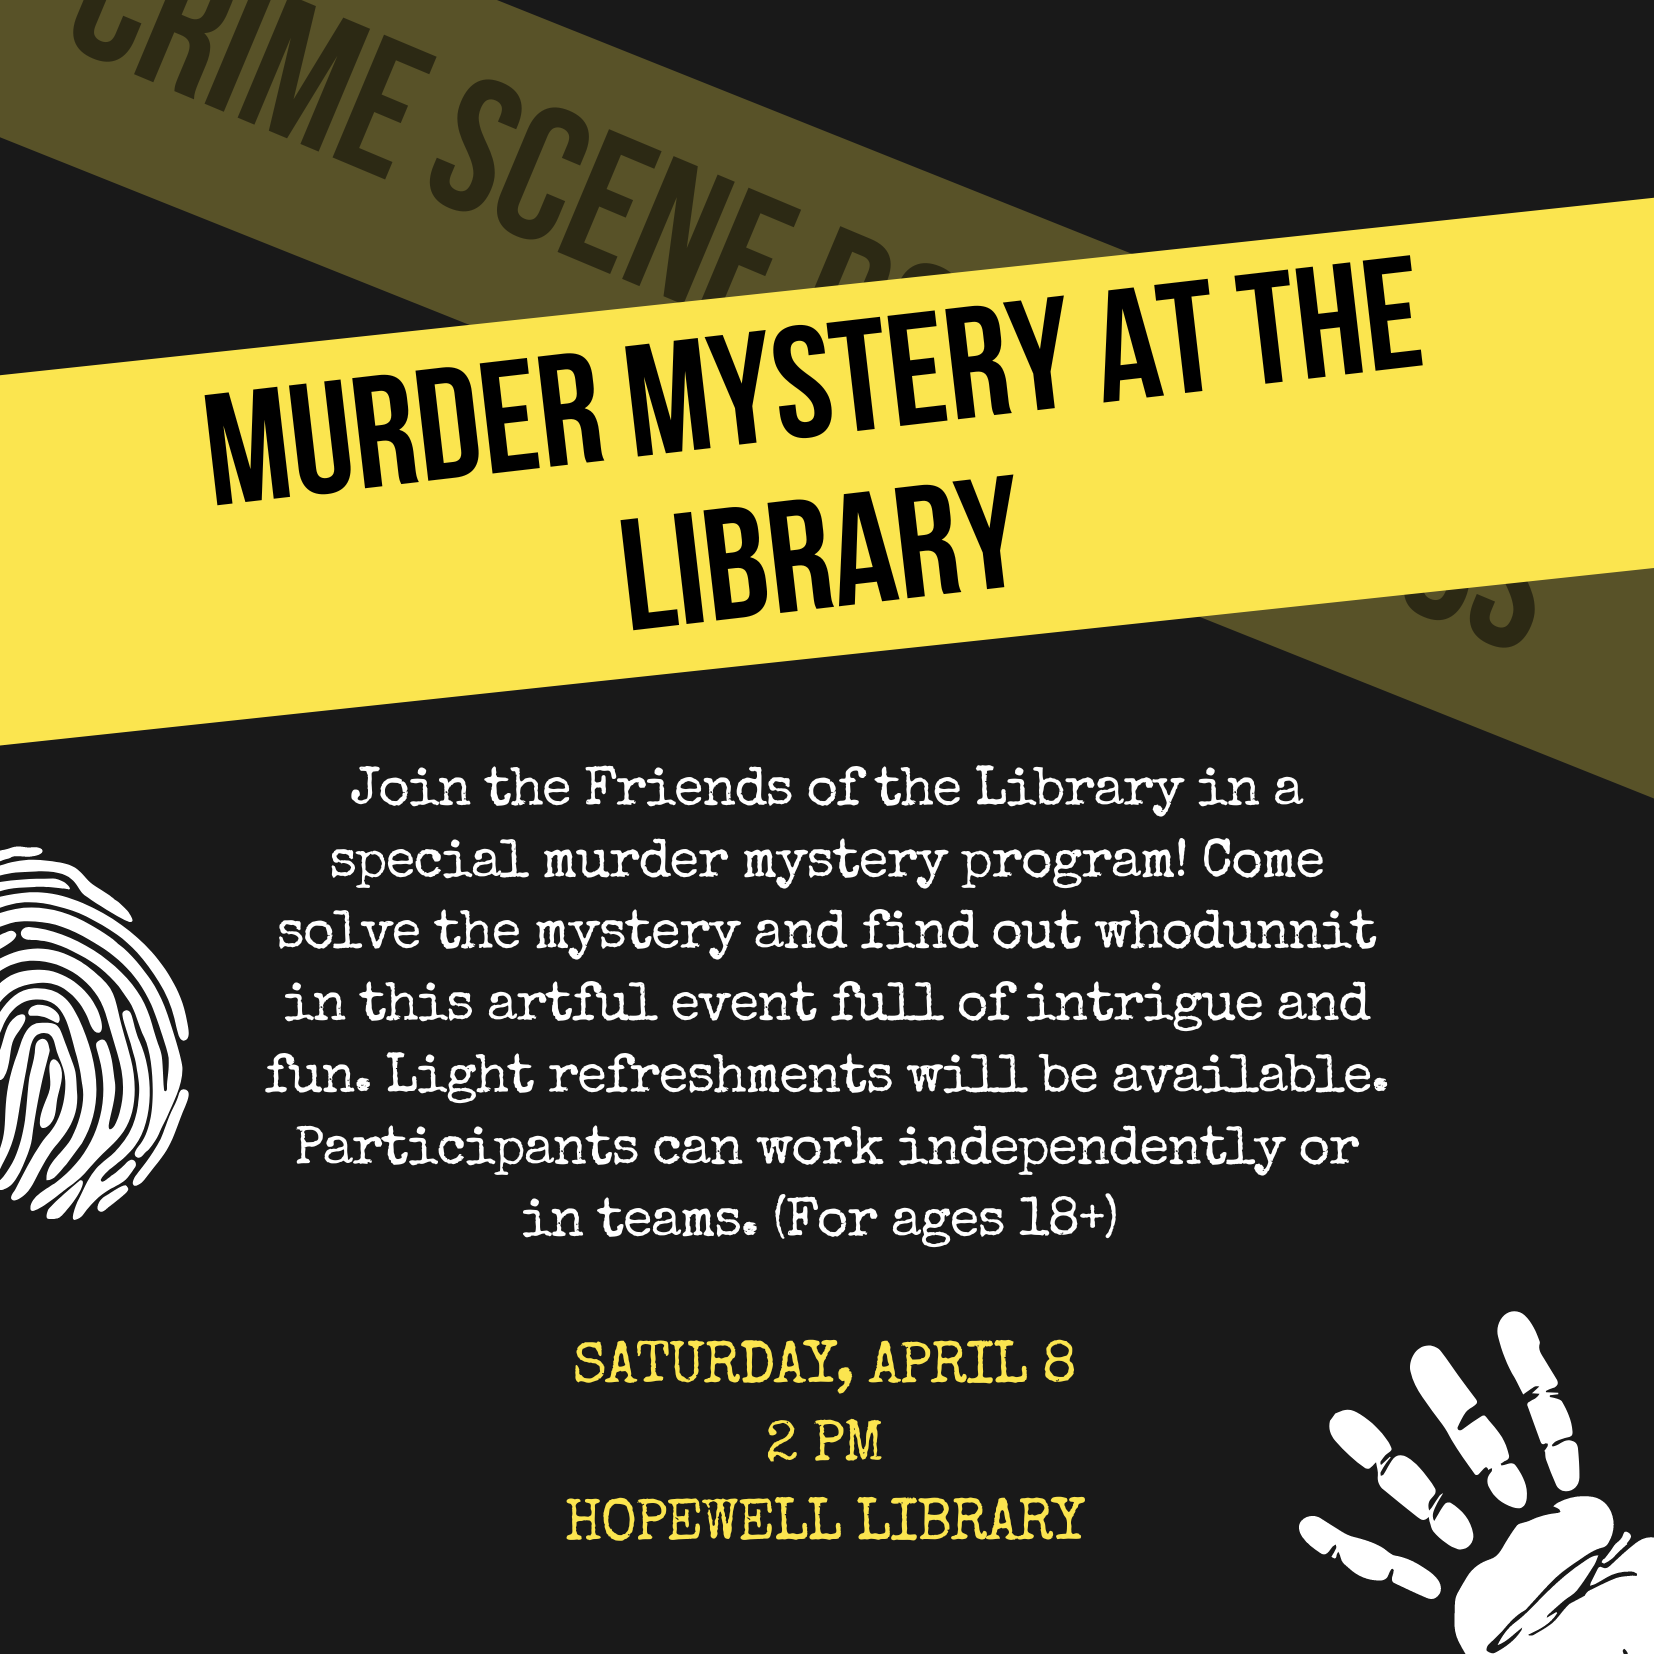 Join the Friends of the Library in a special murder mystery program! Come solve the mystery and find out whodunnit in this artful event full of intrigue and fun. Light refreshments will be available. Participants can work independently or in teams. (For ages 18+)  SATURDAY, APRIL 8 2 PM HOPEWELL LIBRARY